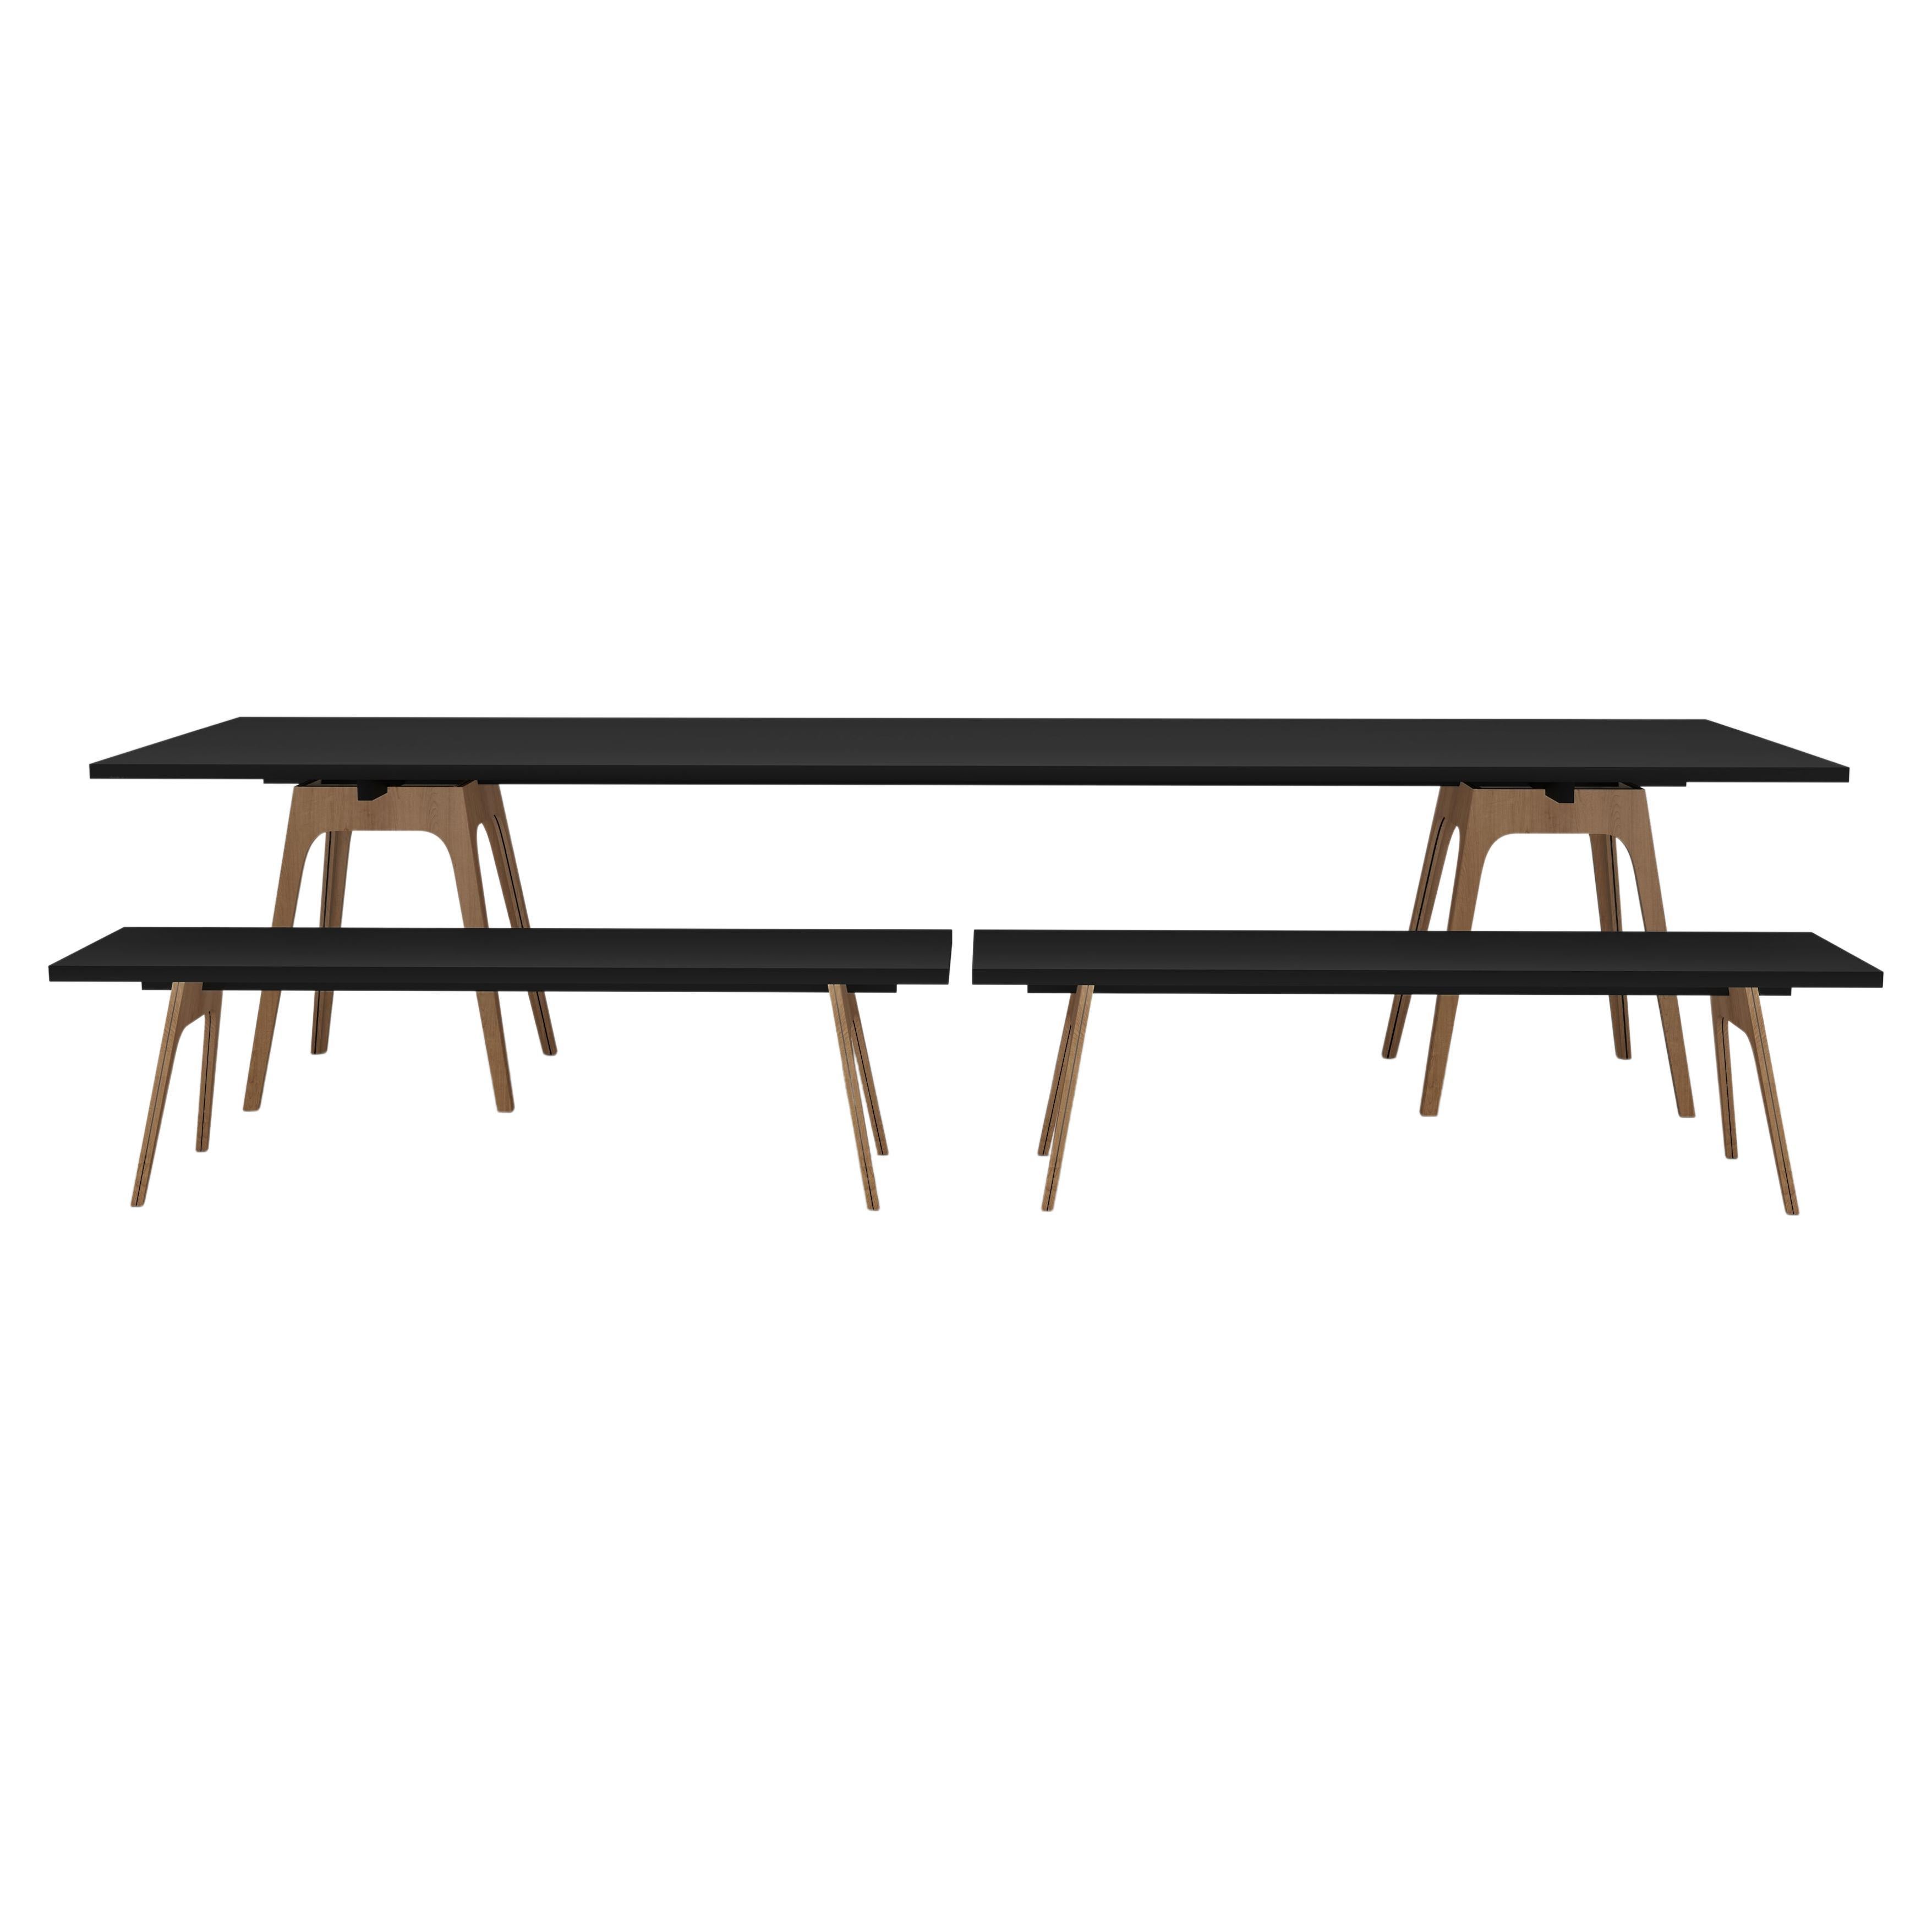 Set of 3 Marina Black Dining Table and Benches by Cools Collection